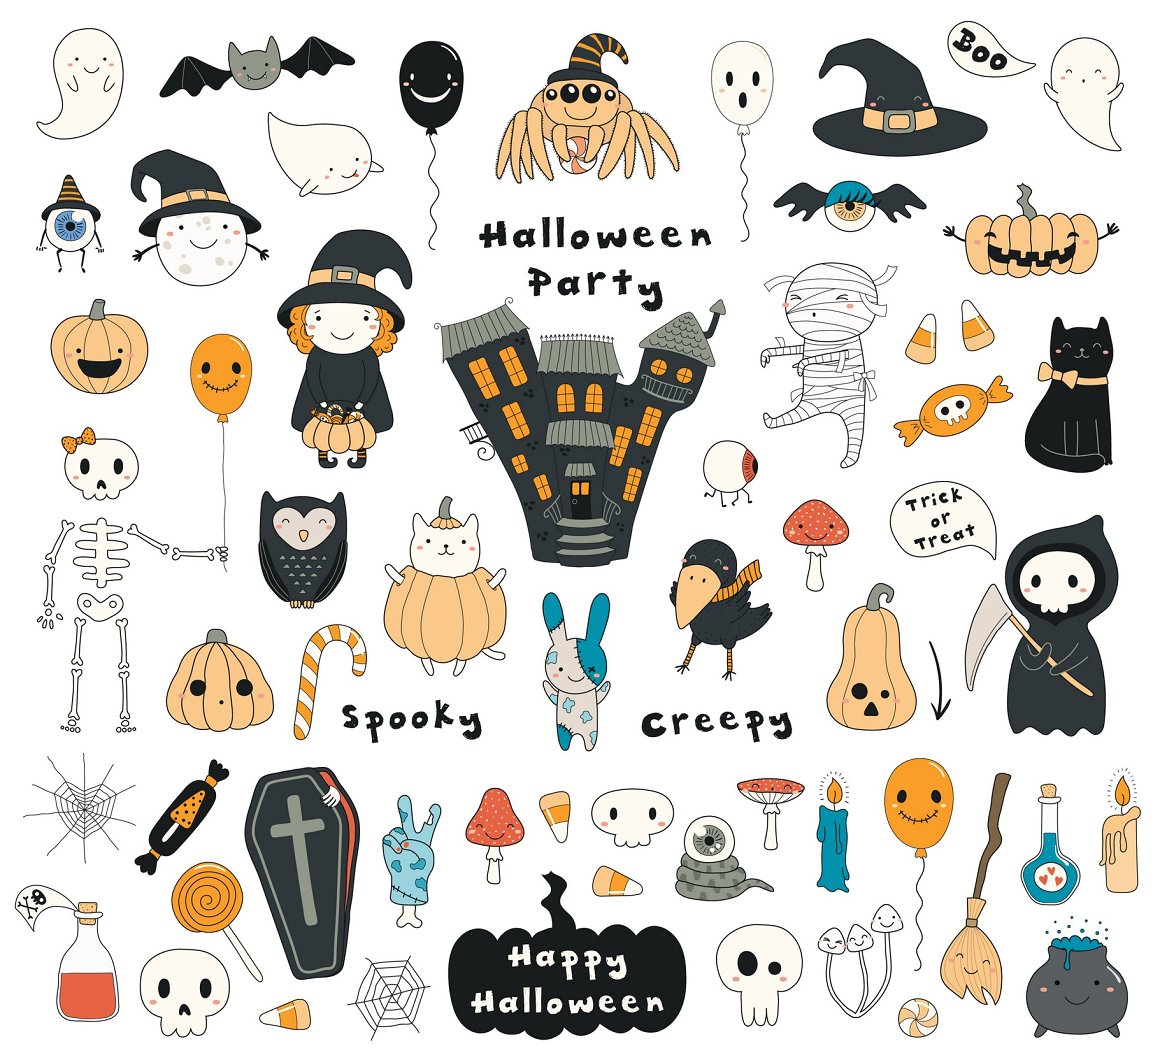 Halloween and monster themed images.